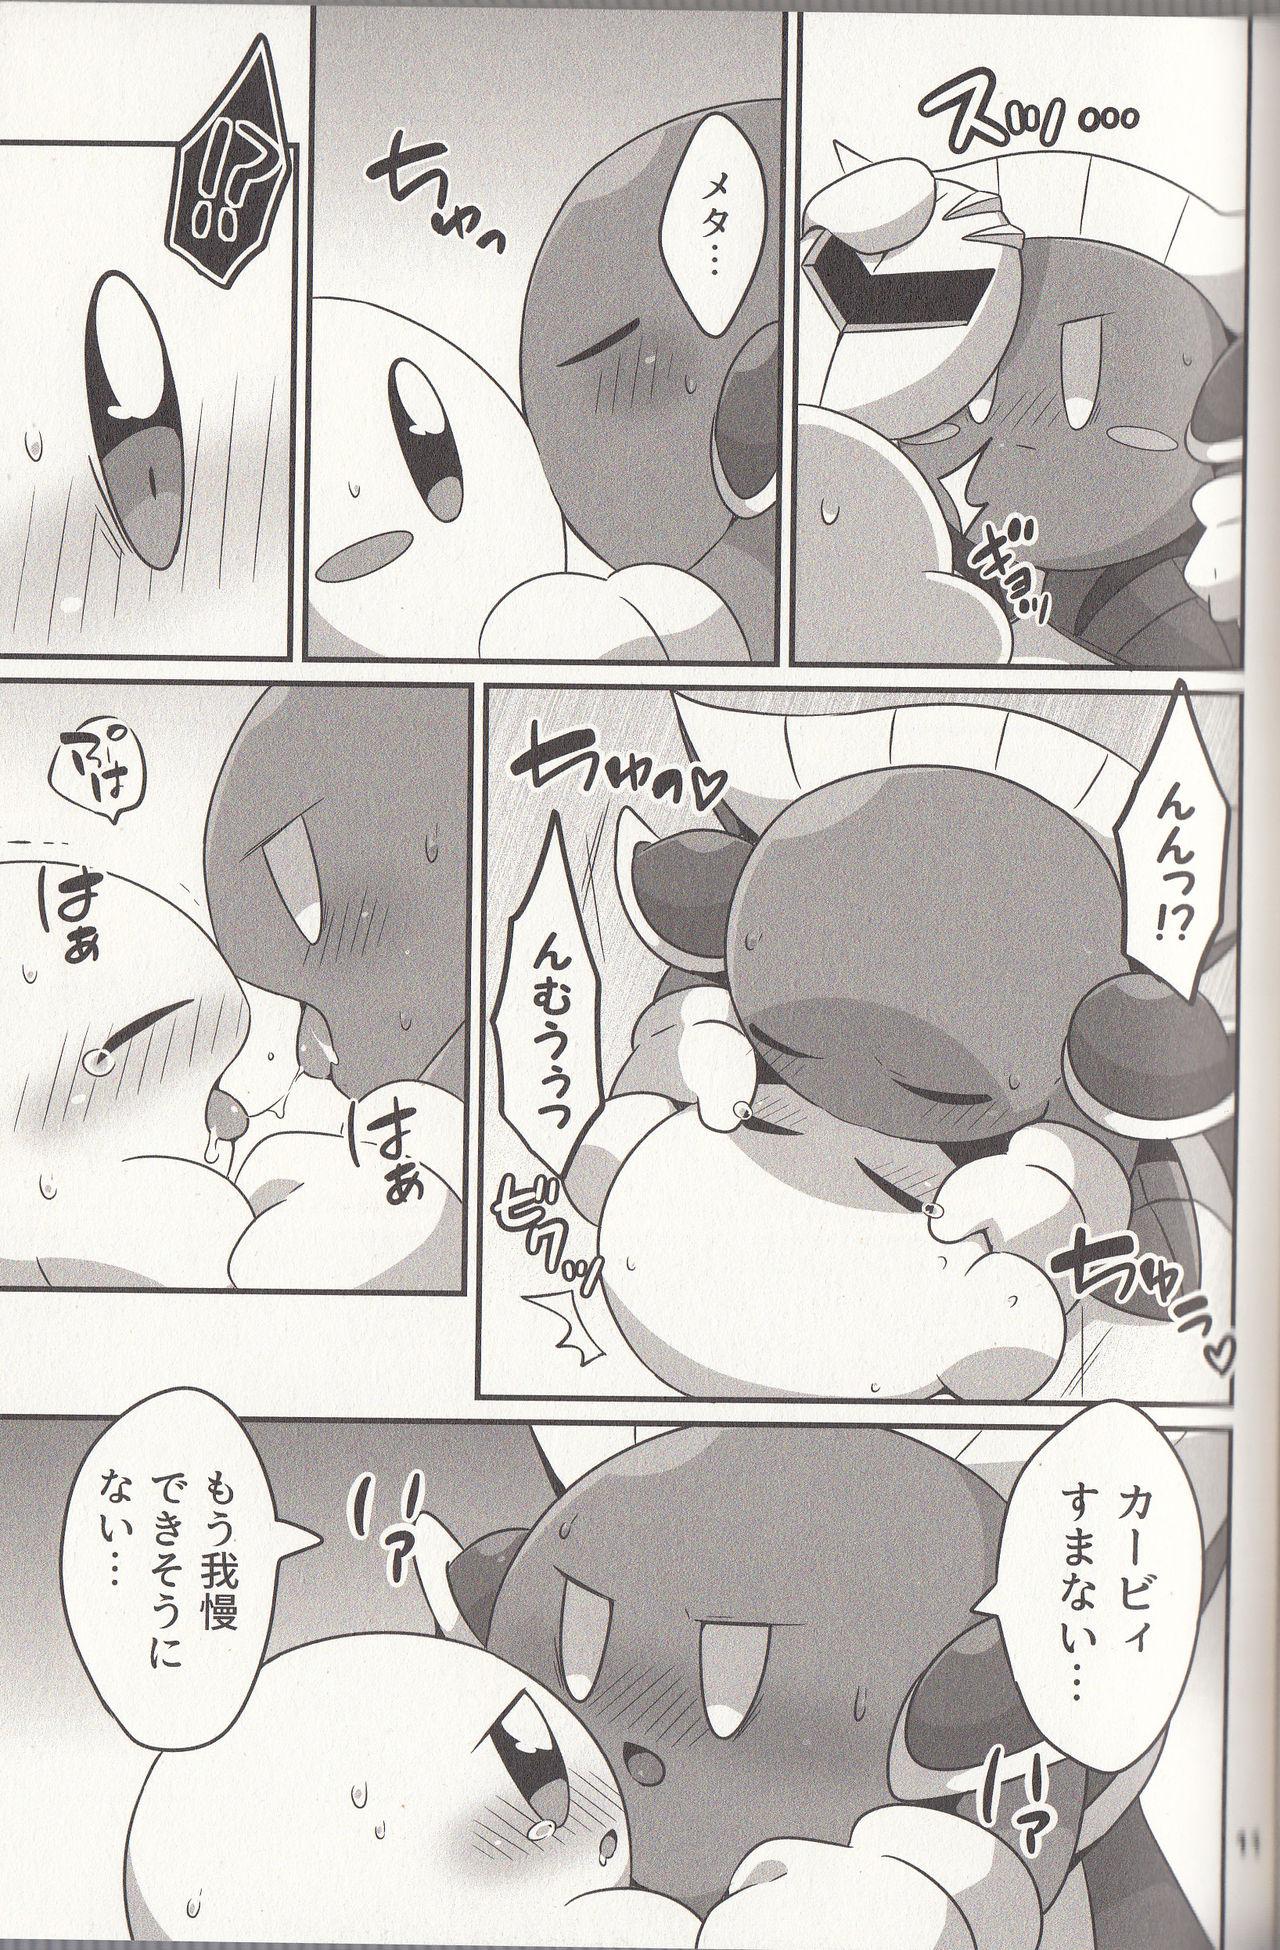 Rimjob I Want to Do XXX Even For Spheres! - Kirby Bbc - Page 10